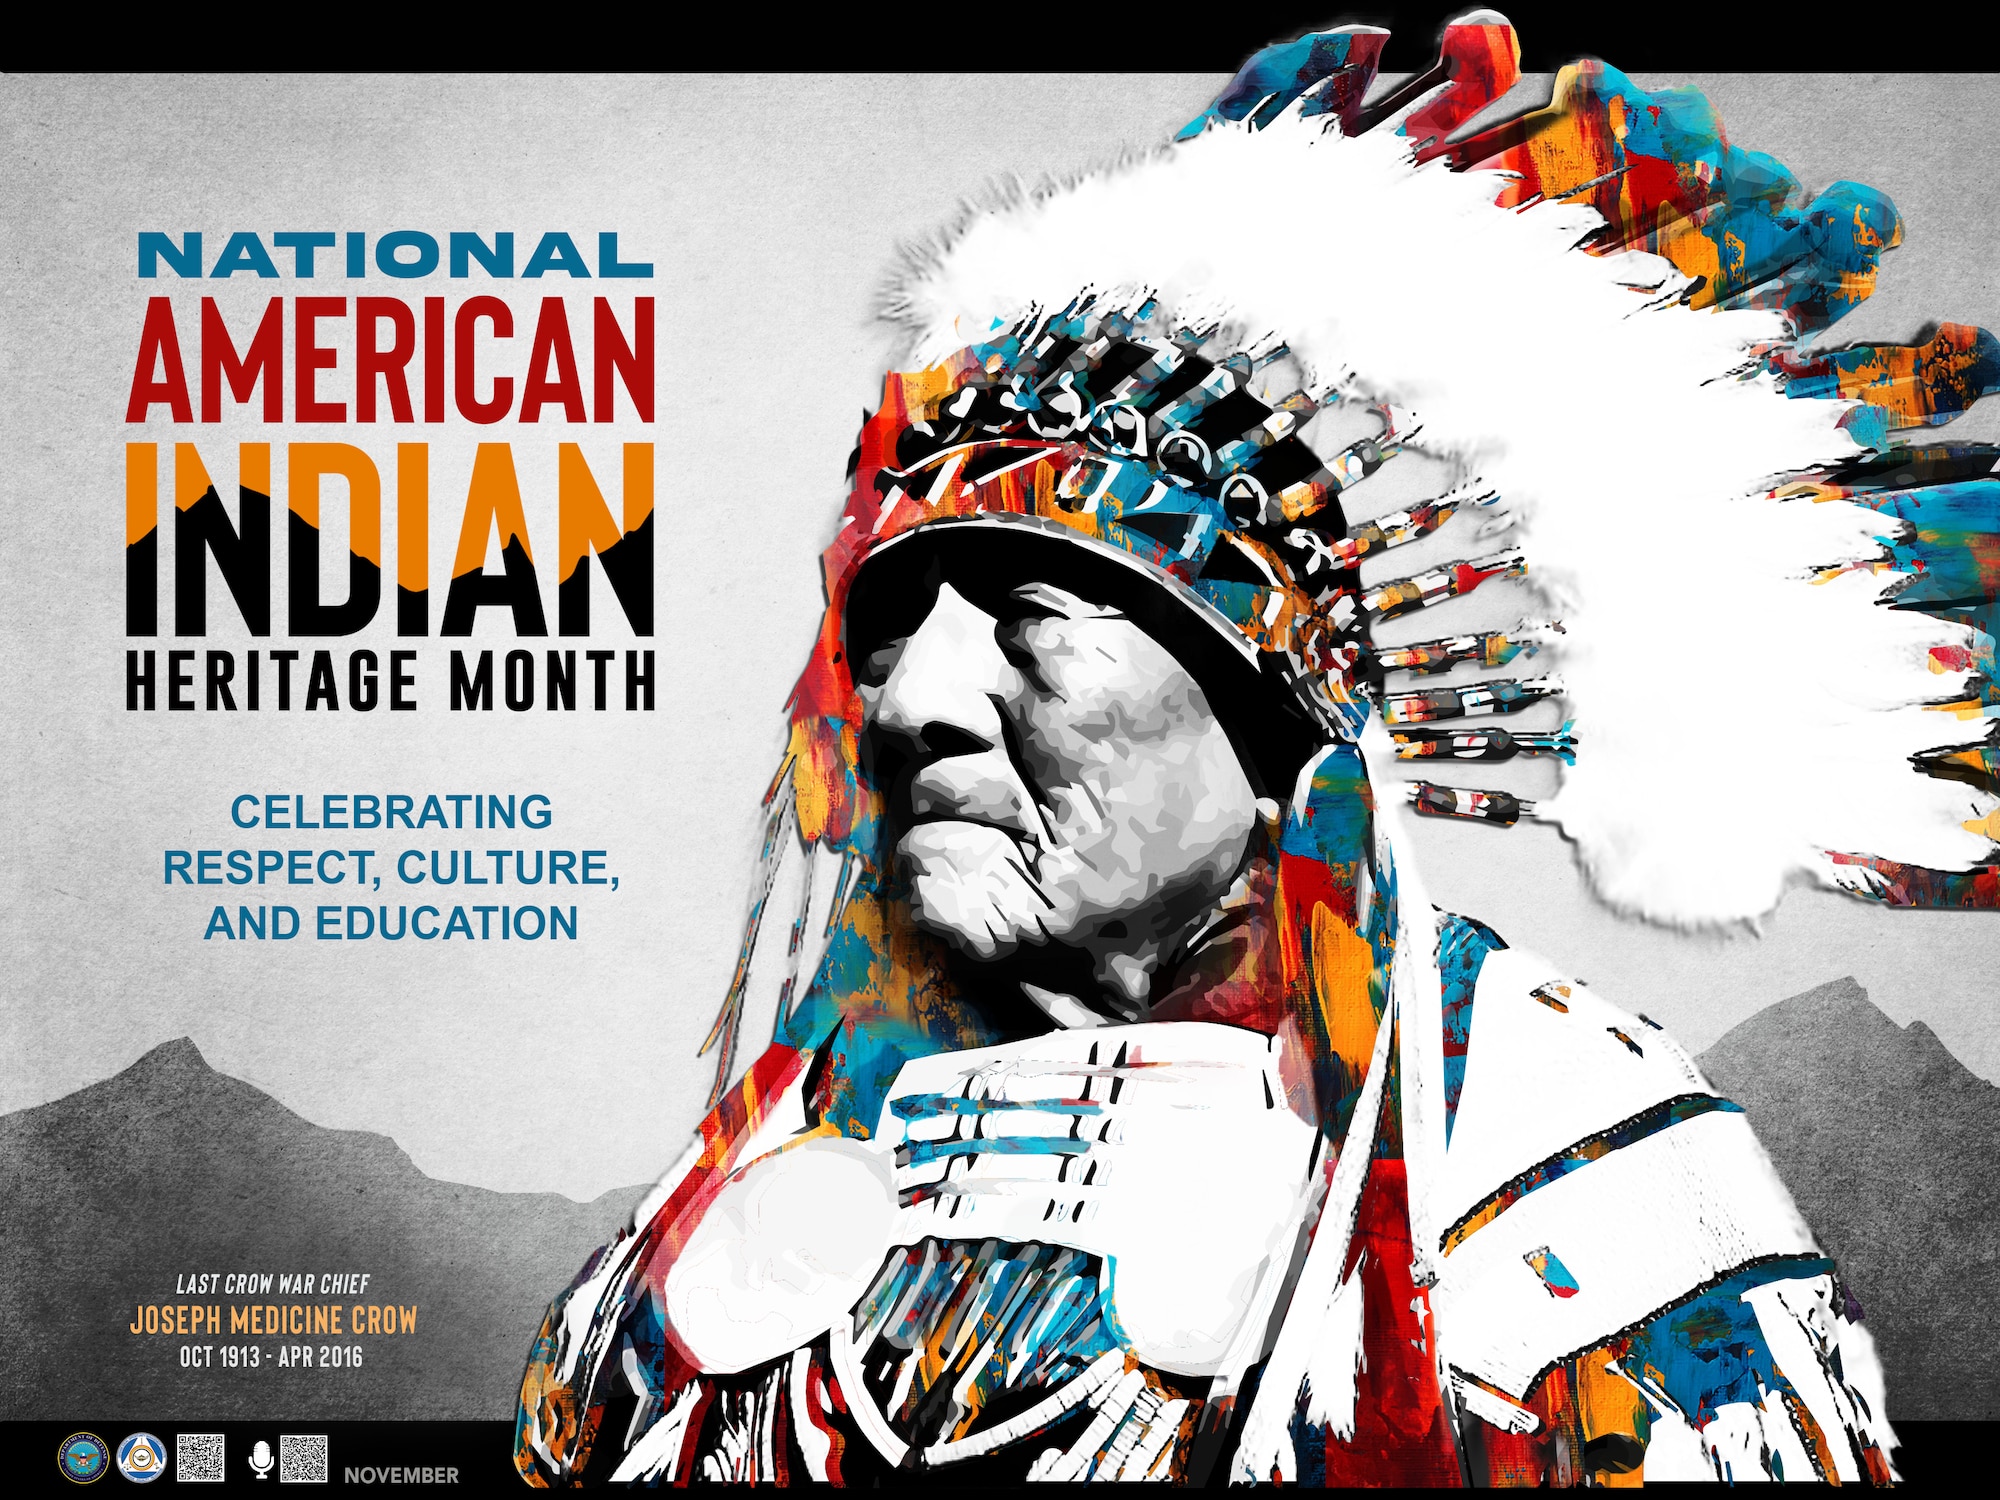 Graphic showing Native American in traditional headdress.